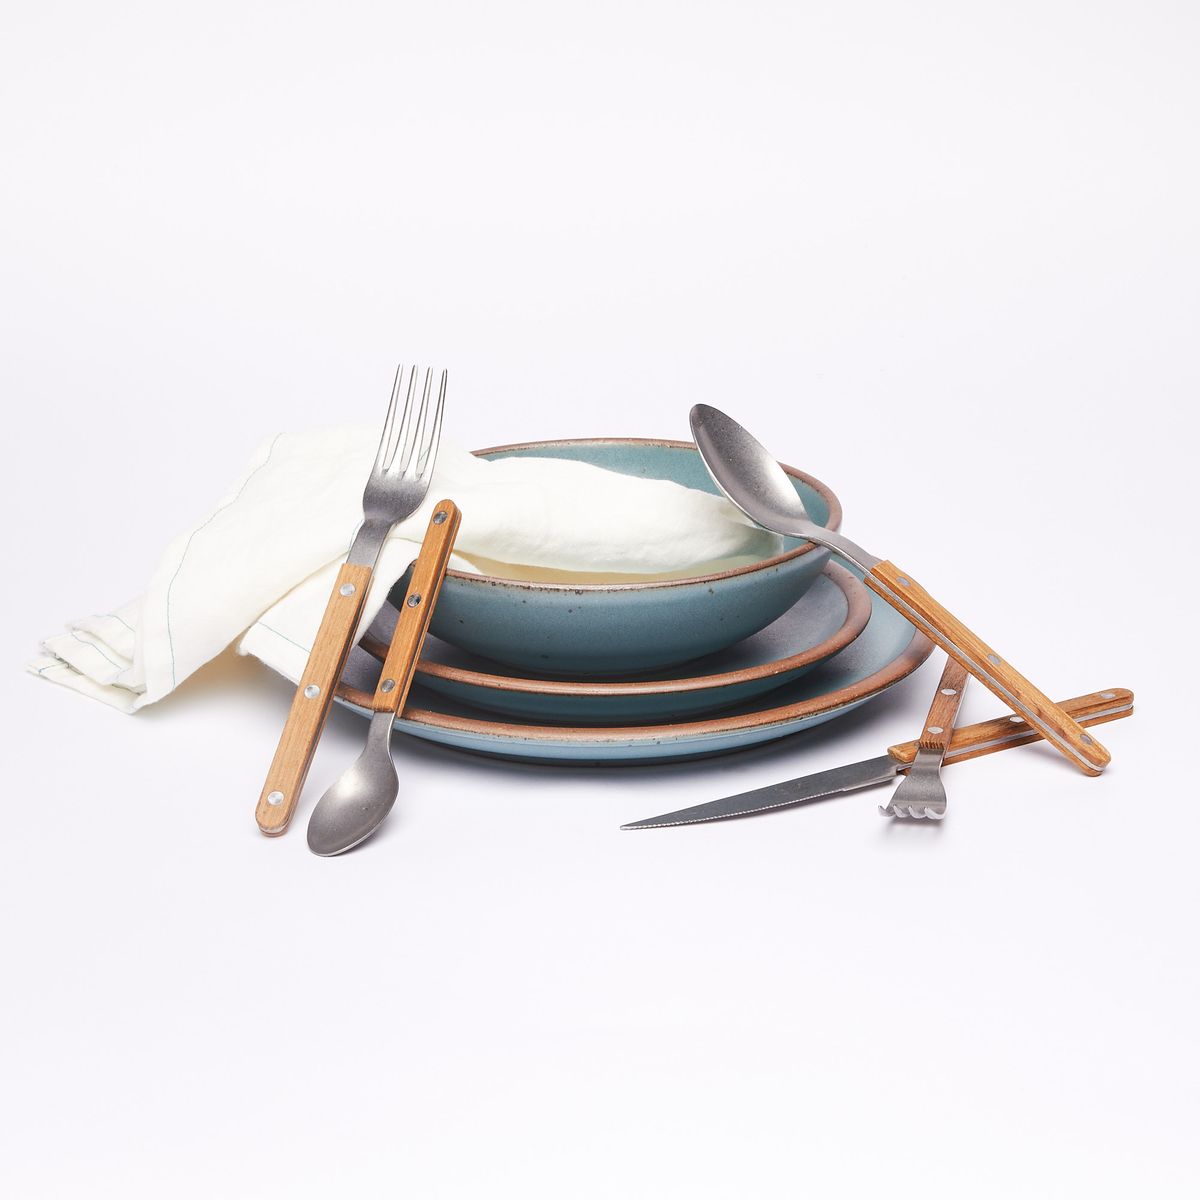 An everyday bowl, side plate, and dinner plate in turquoise stacked with a linen napkin surround by five pieces of teak-handled flatware